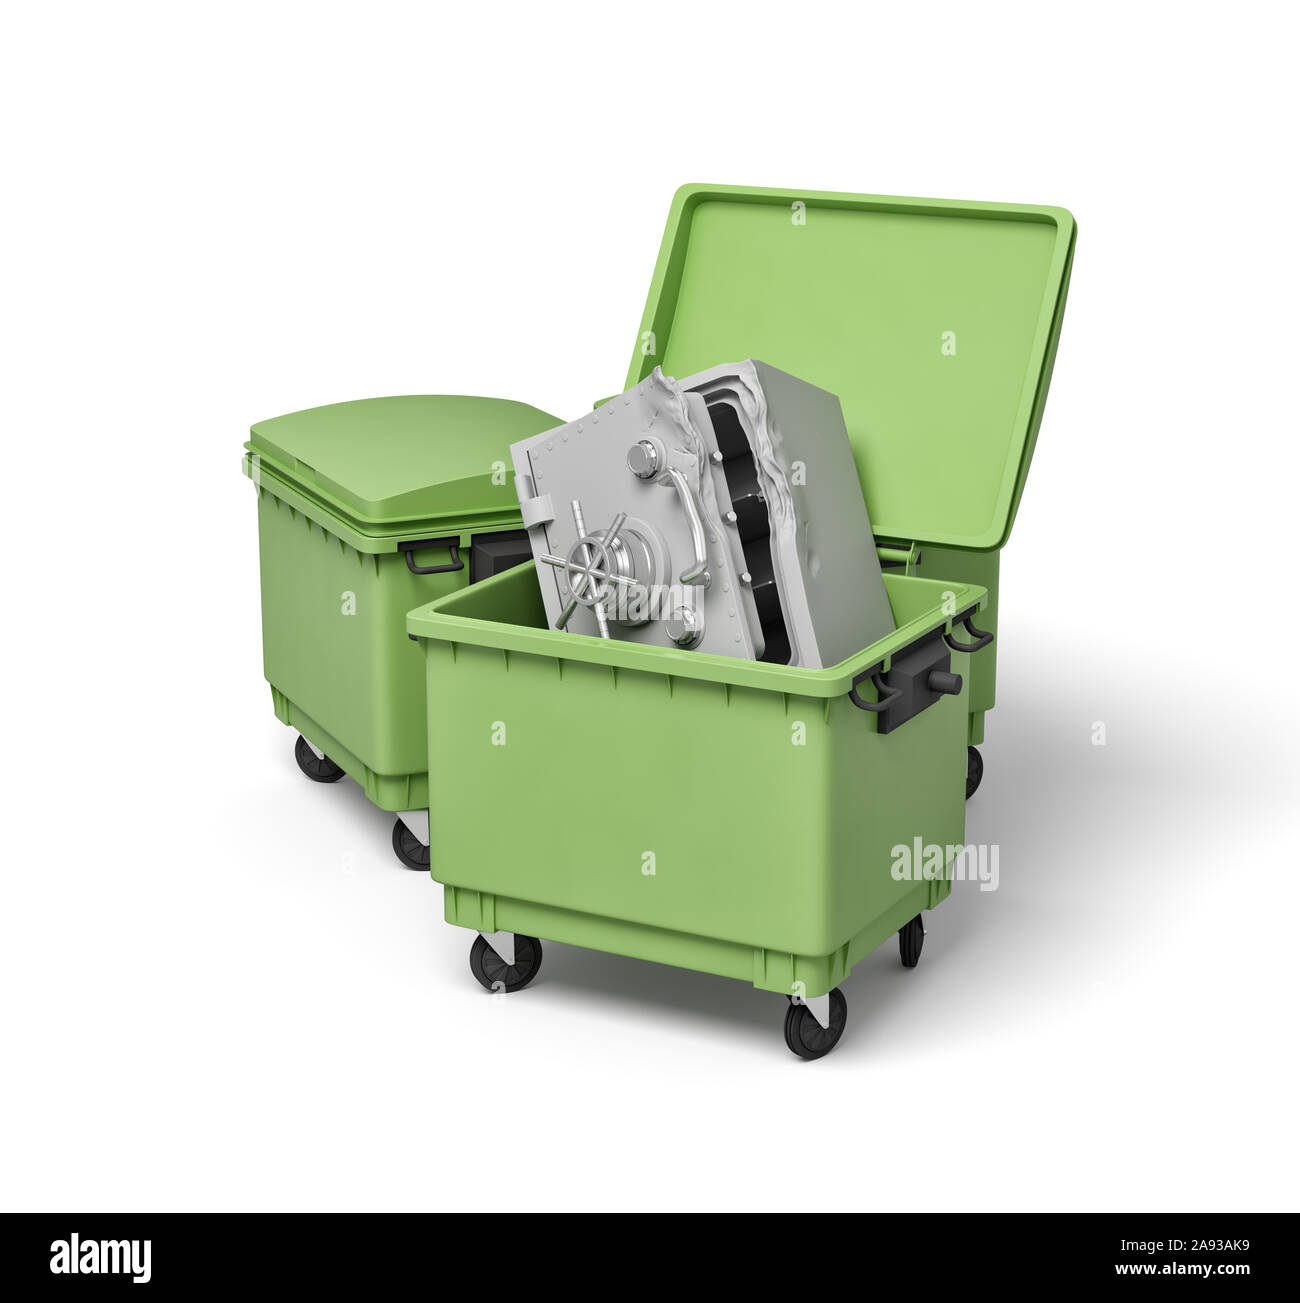 3d rendering of two green trash cans, front can open with bent and broken metal safe inside. Stock Photo